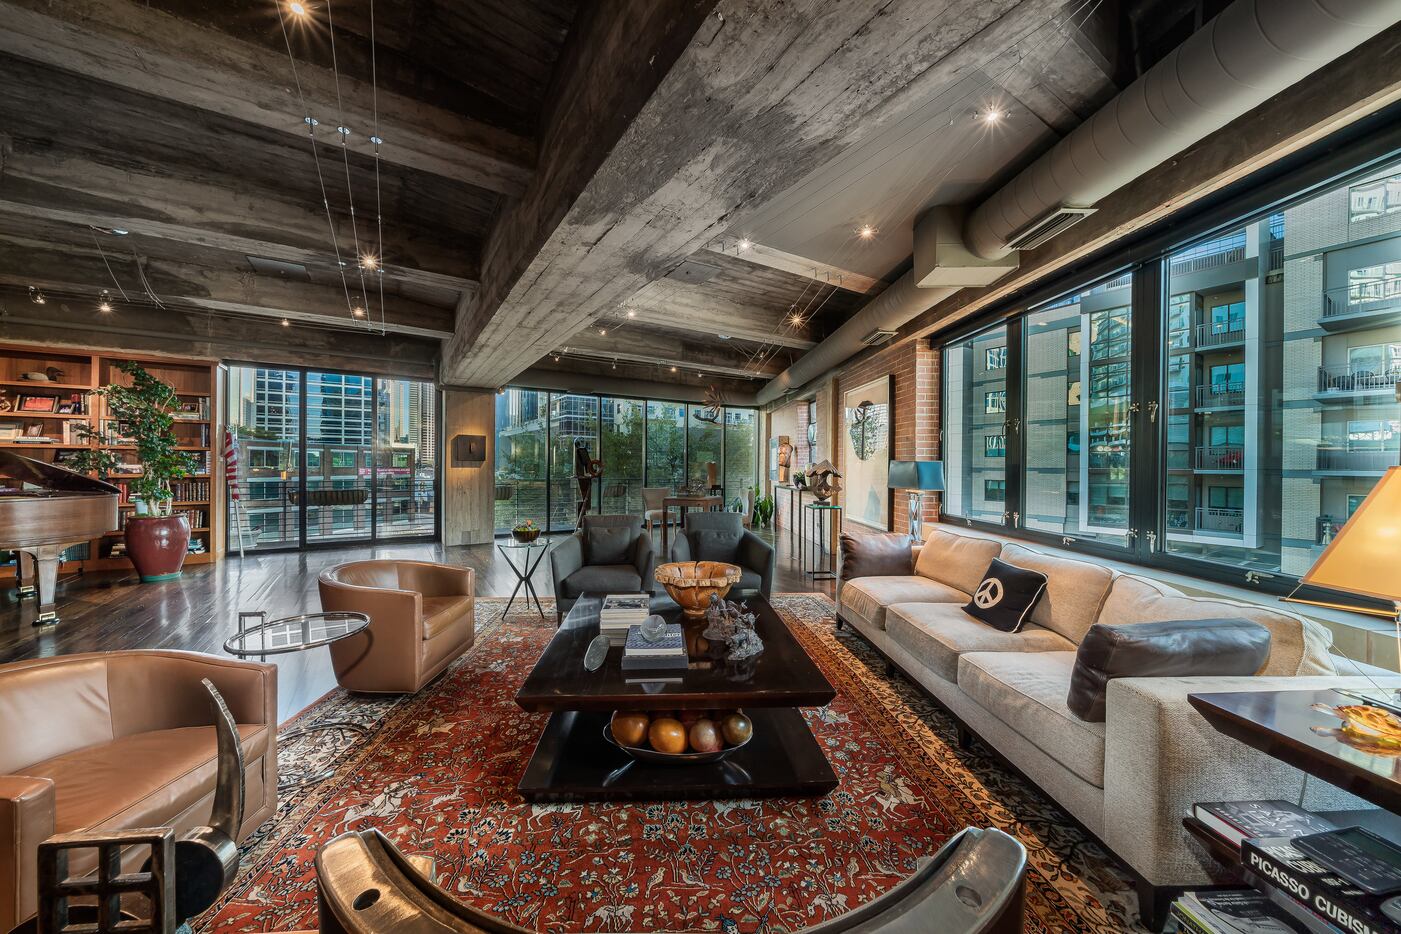 This Dallas luxury loft has a two-story foyer and views of the city